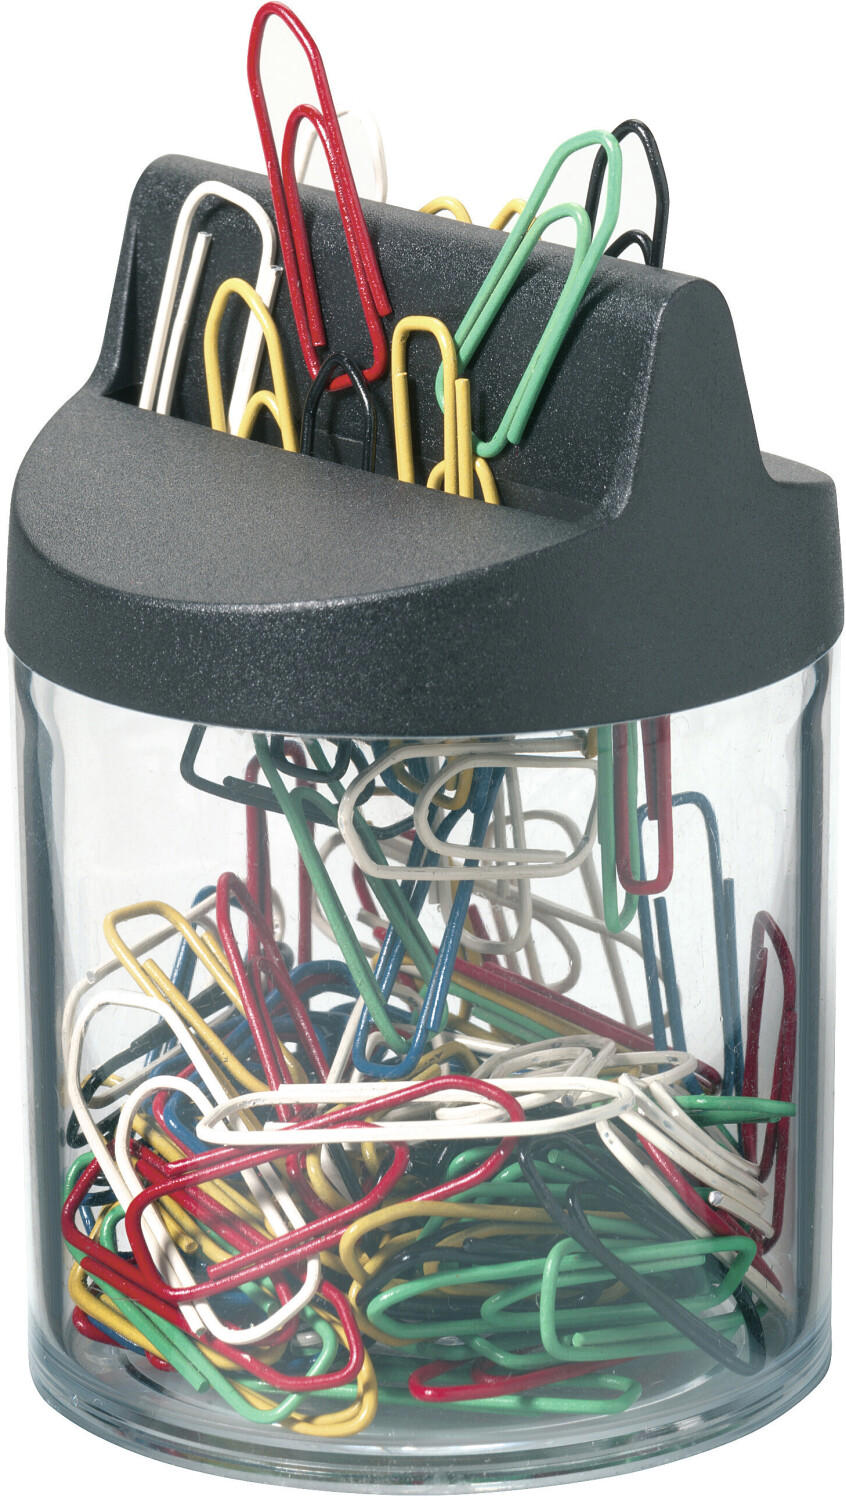 DURABLE 124000 Paper clip dispenser with magnet 1 piece and 125 paper clips 26 mm Black / transprent